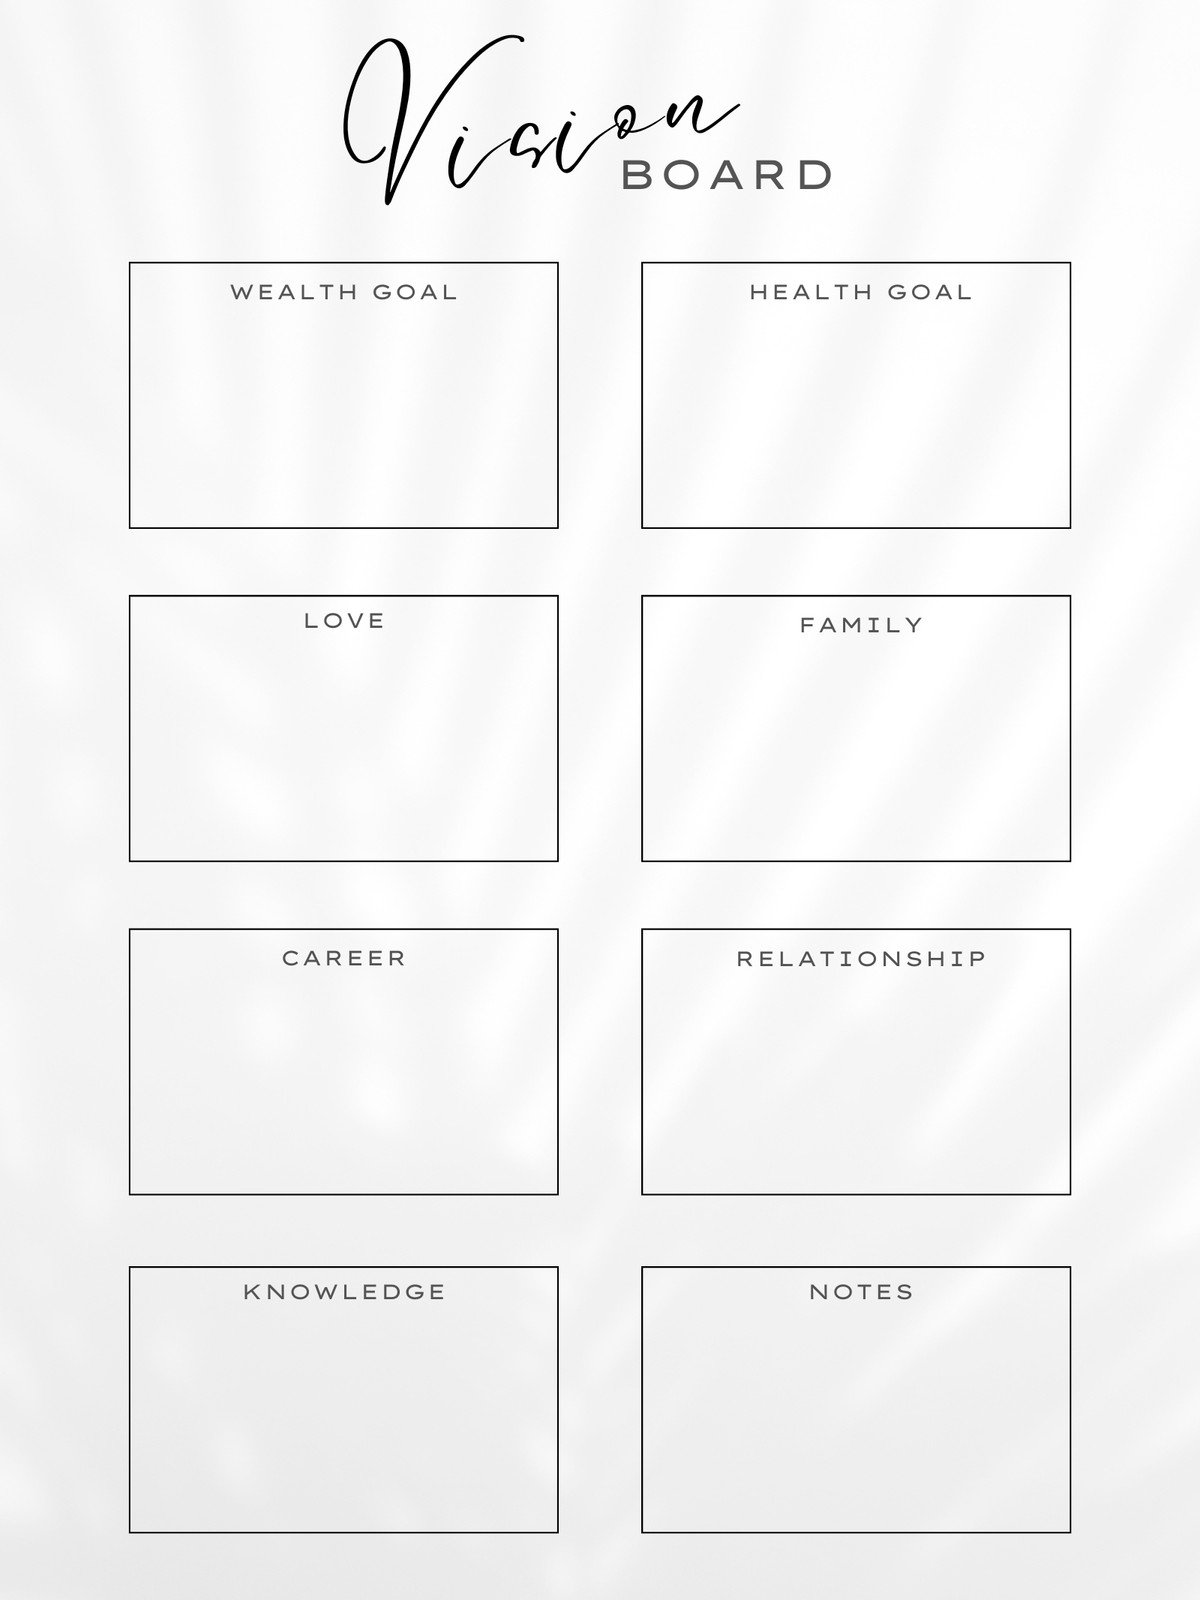 Life Goals Planner - Neat and Tidy Design